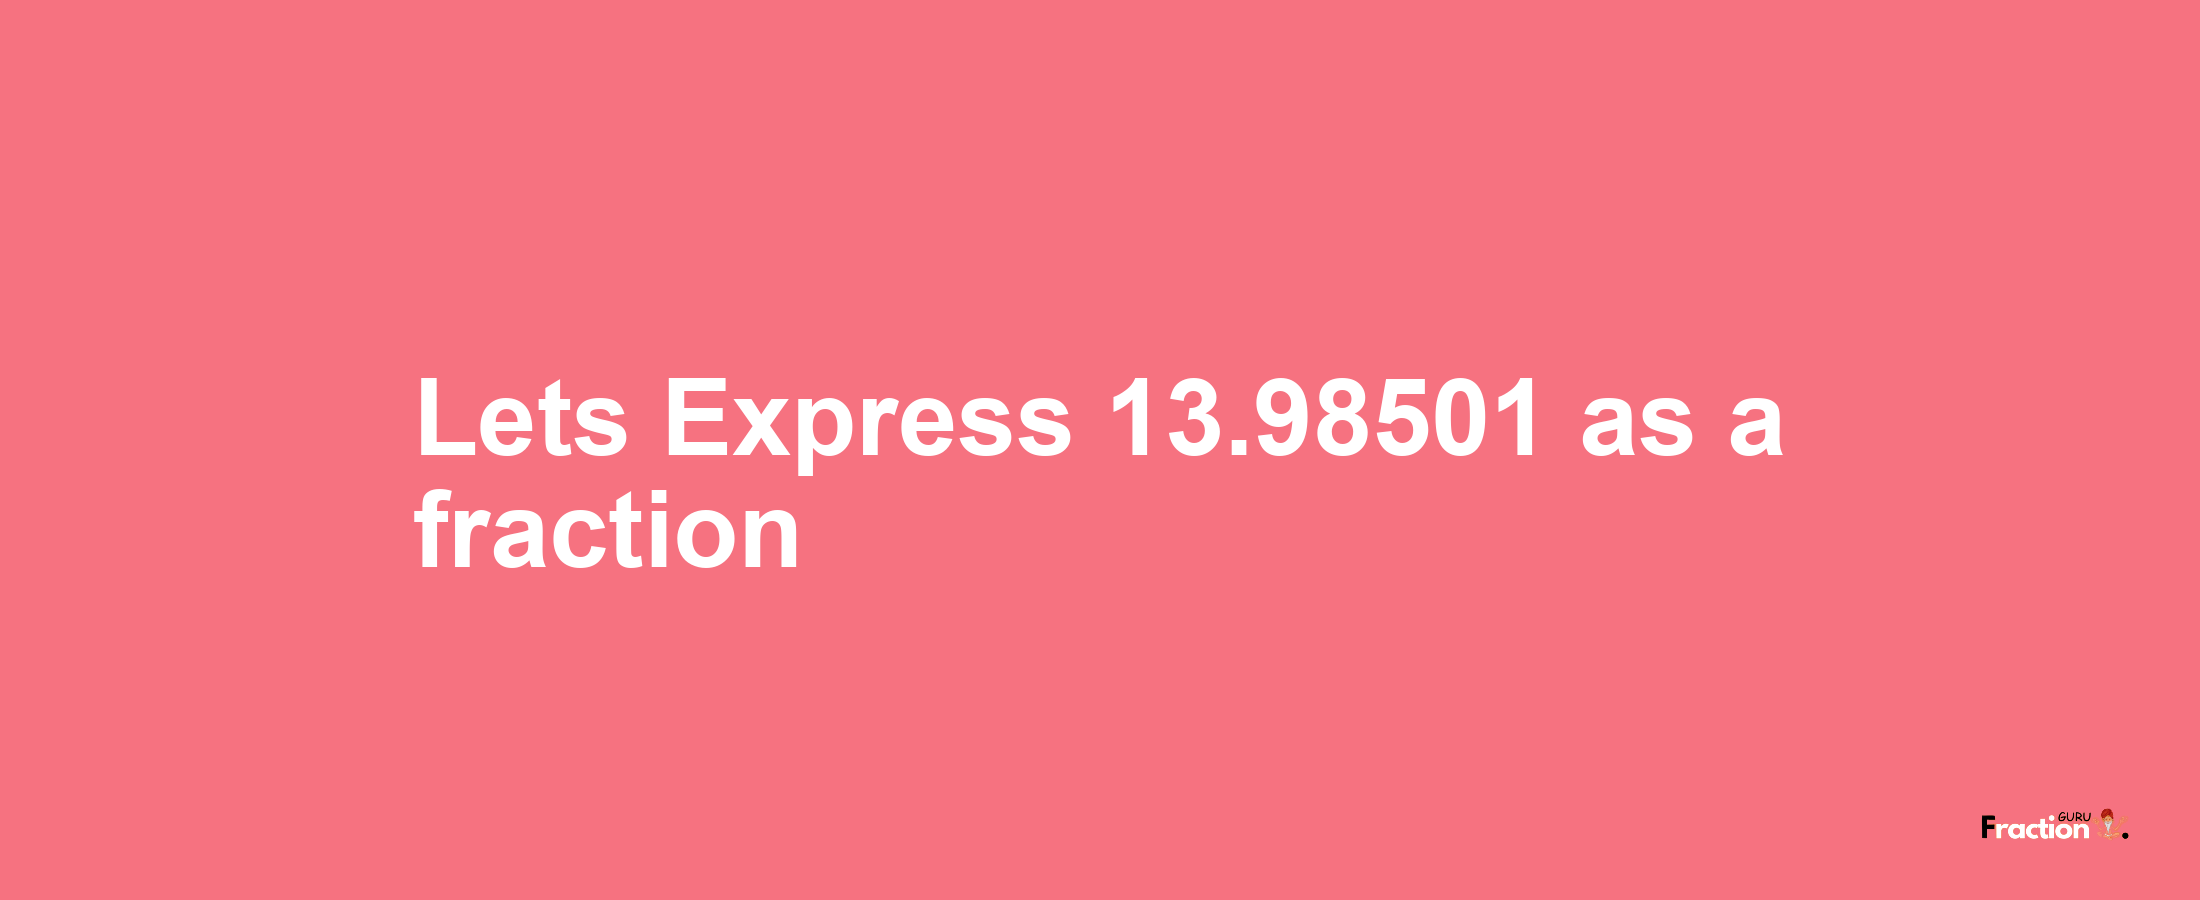 Lets Express 13.98501 as afraction